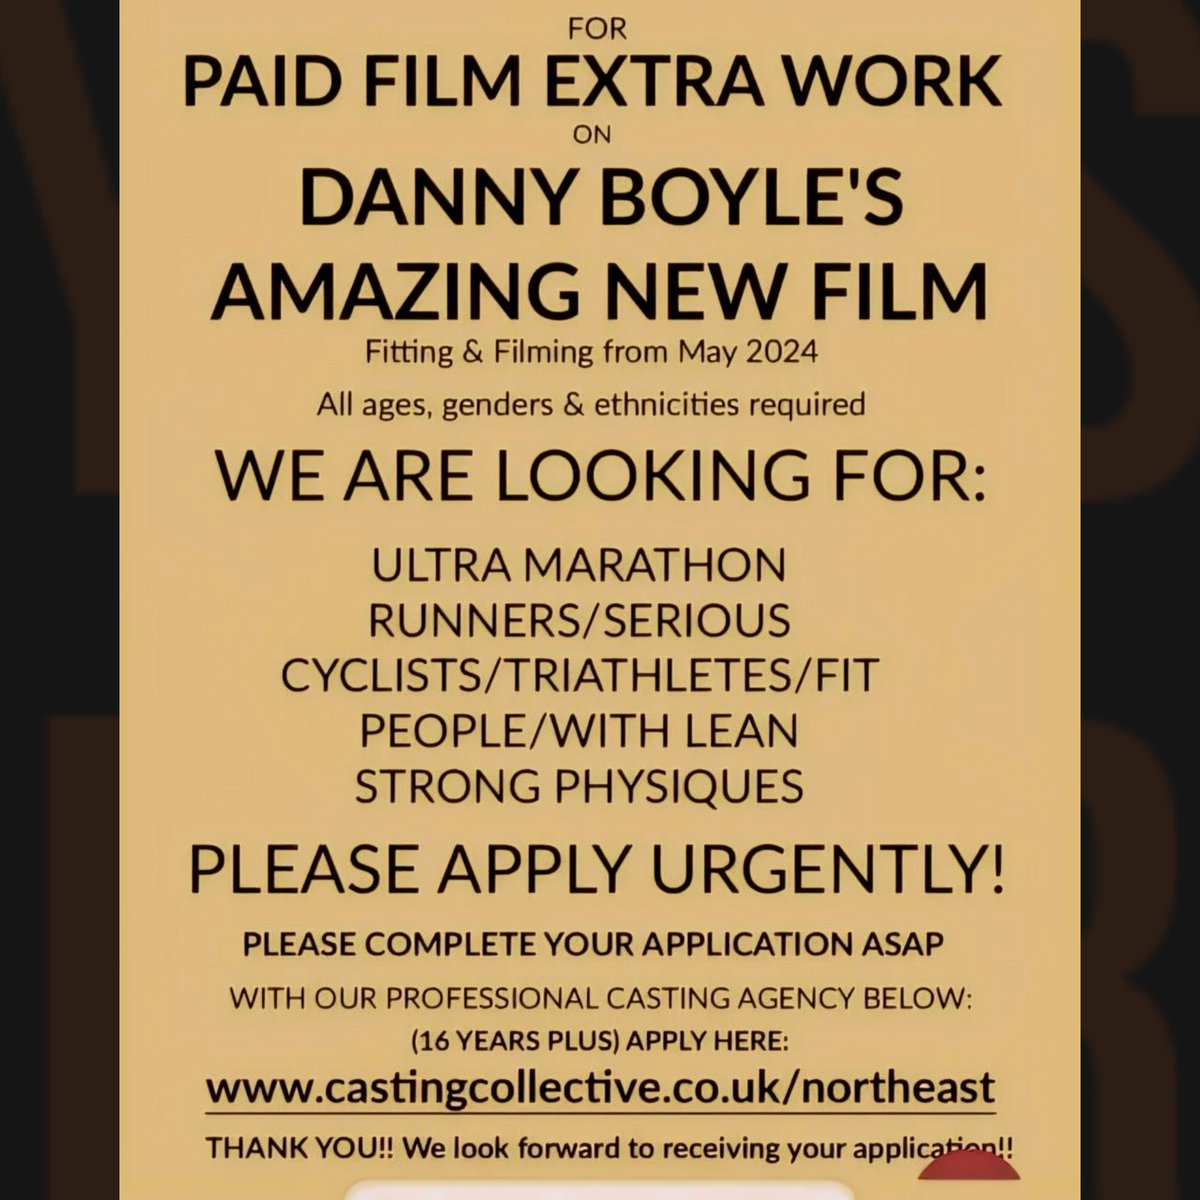 Urgent Casting Calls! 🇬🇧 seeking athletic extras!
Danny Boyle's '28 Years Later' begins filming in May.
castingcollective.co.uk/northeast

#28dayslater #28weekslater #28yearslater